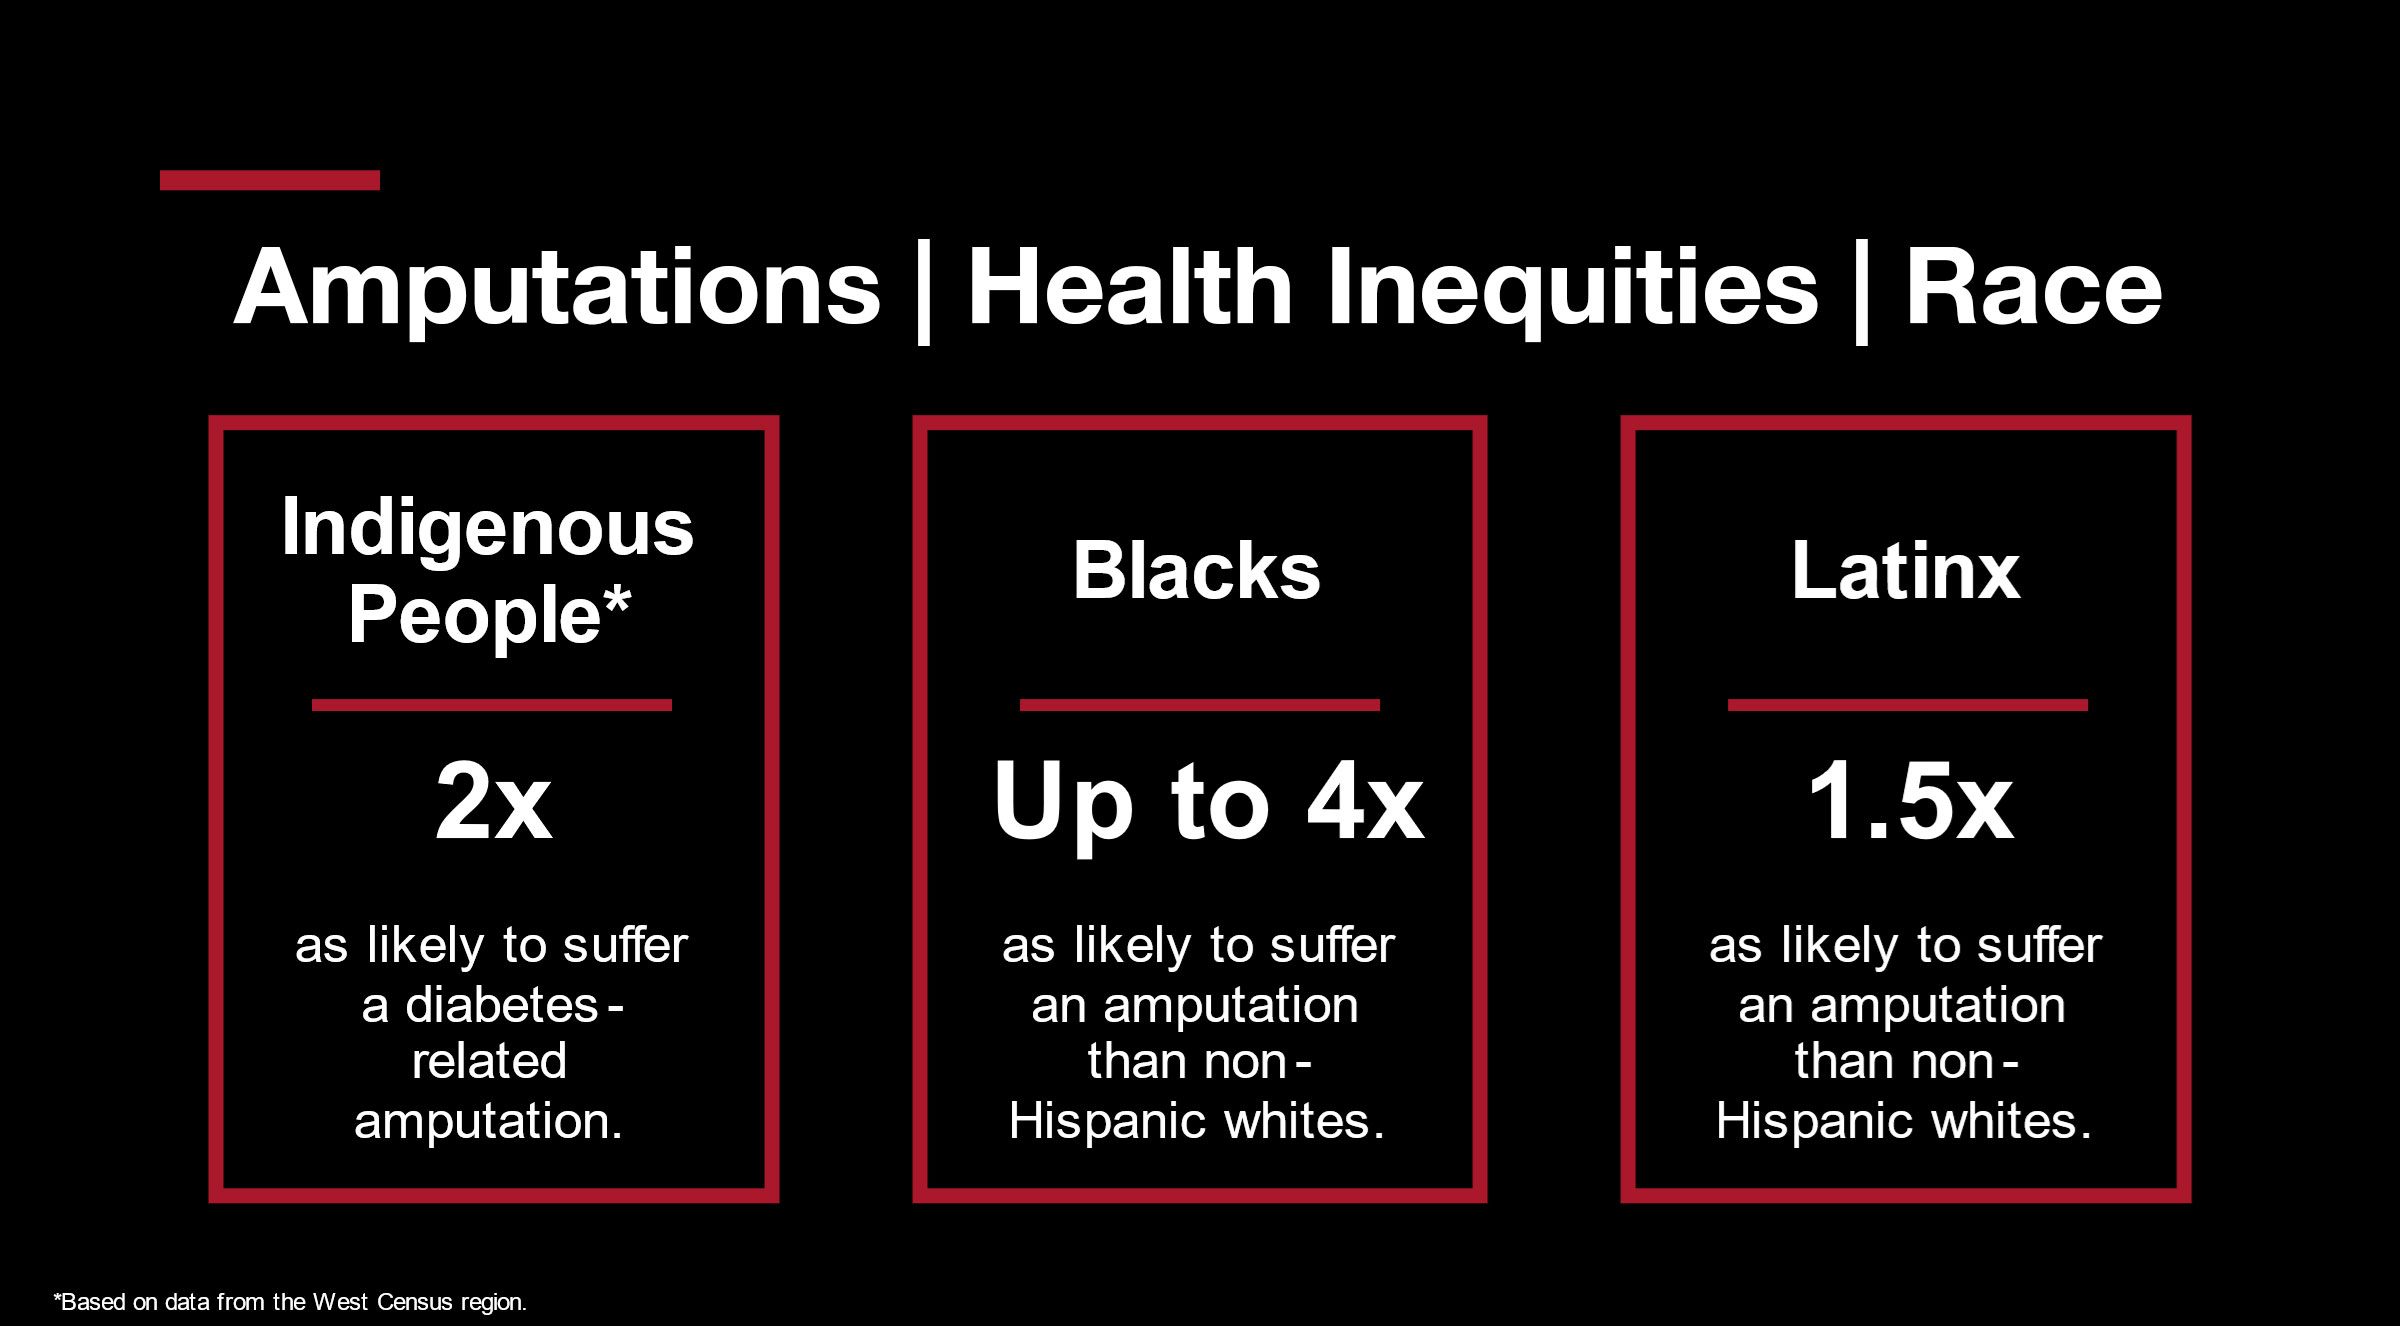 Amputation inequities and race infographic